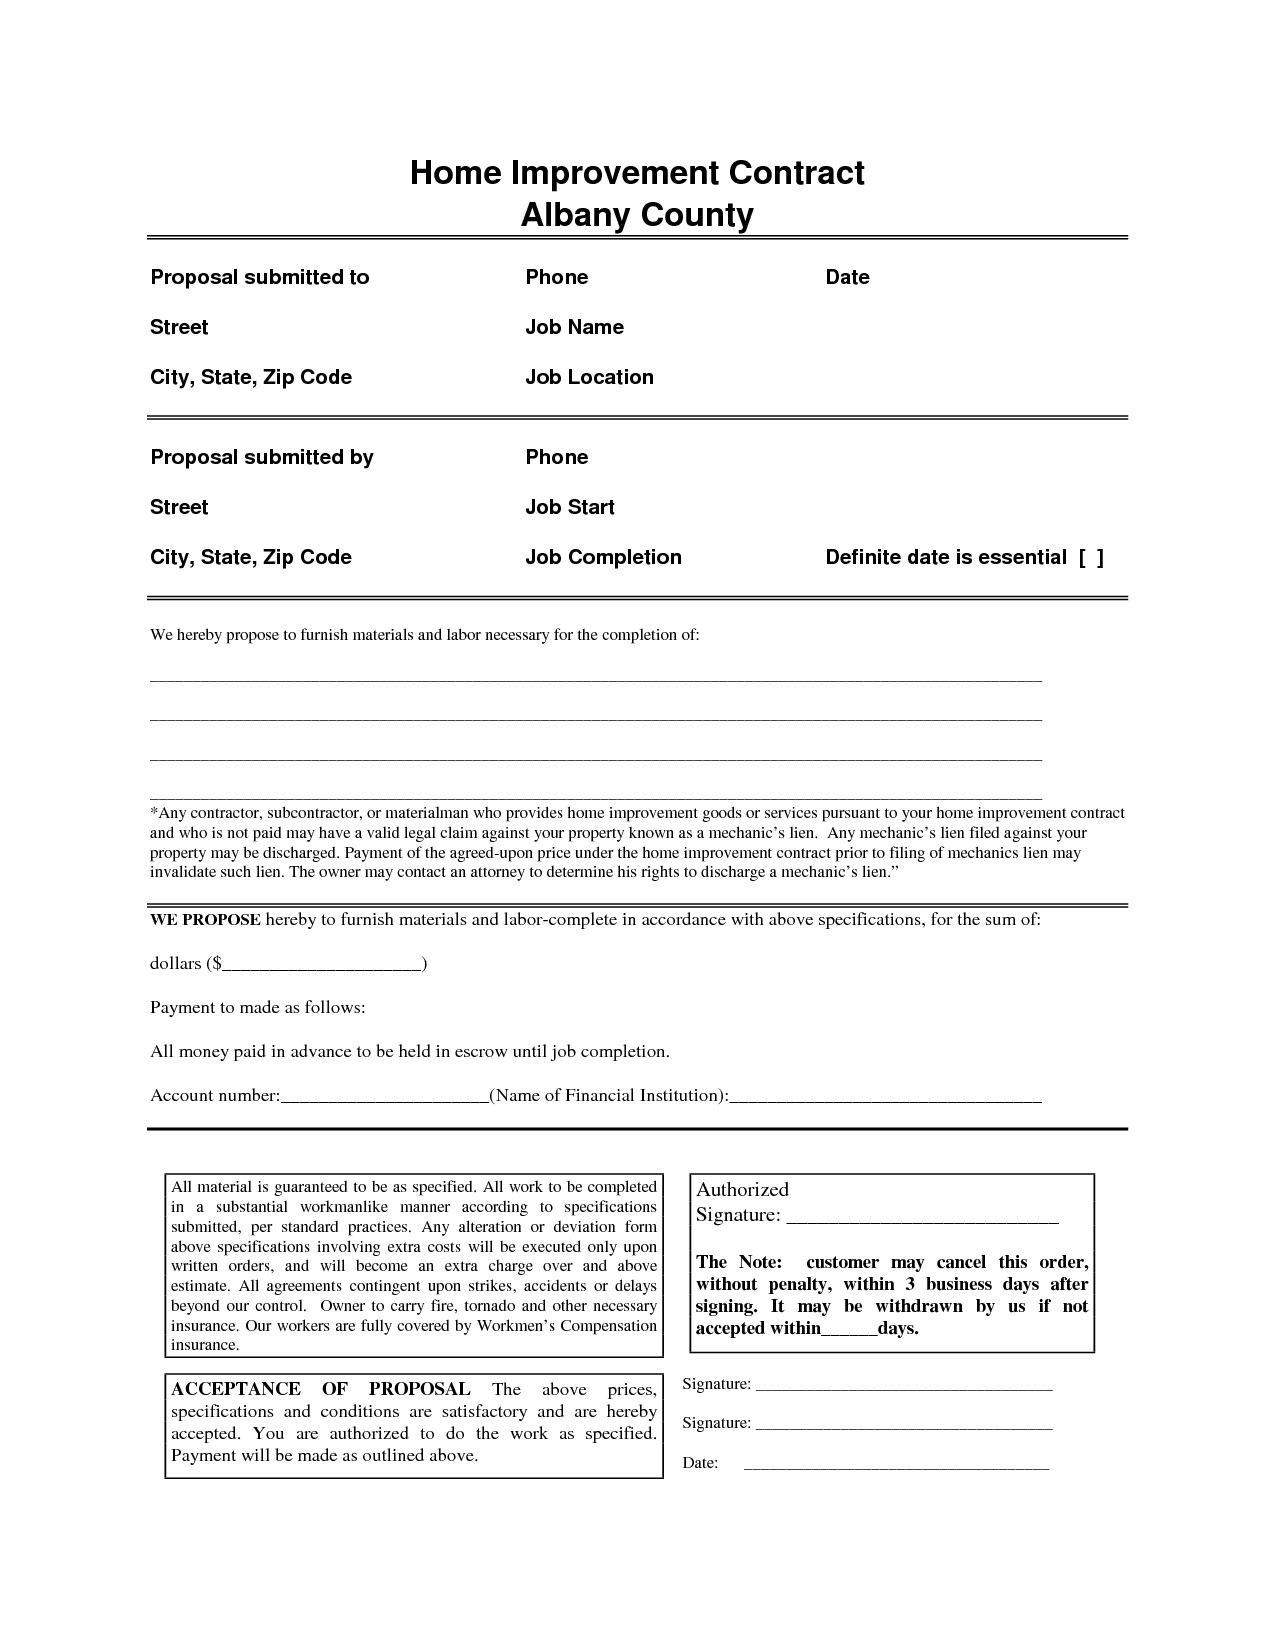 Home Improvement Contract Free Printable Documents